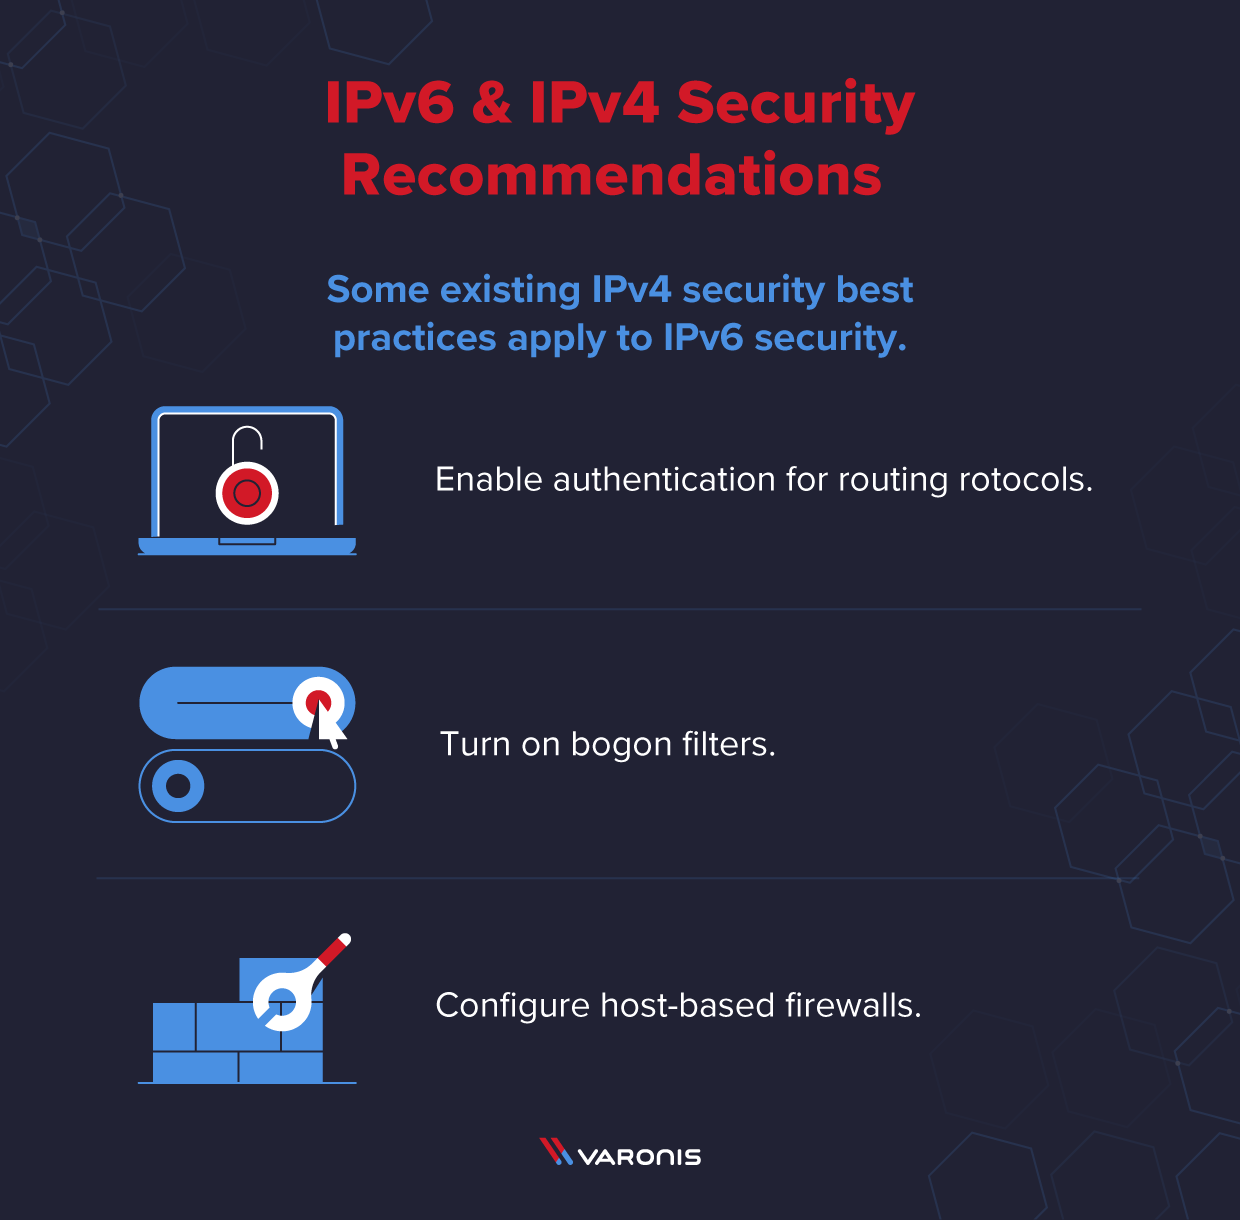 three IPv4 security recommendations that apply to IPv6 security